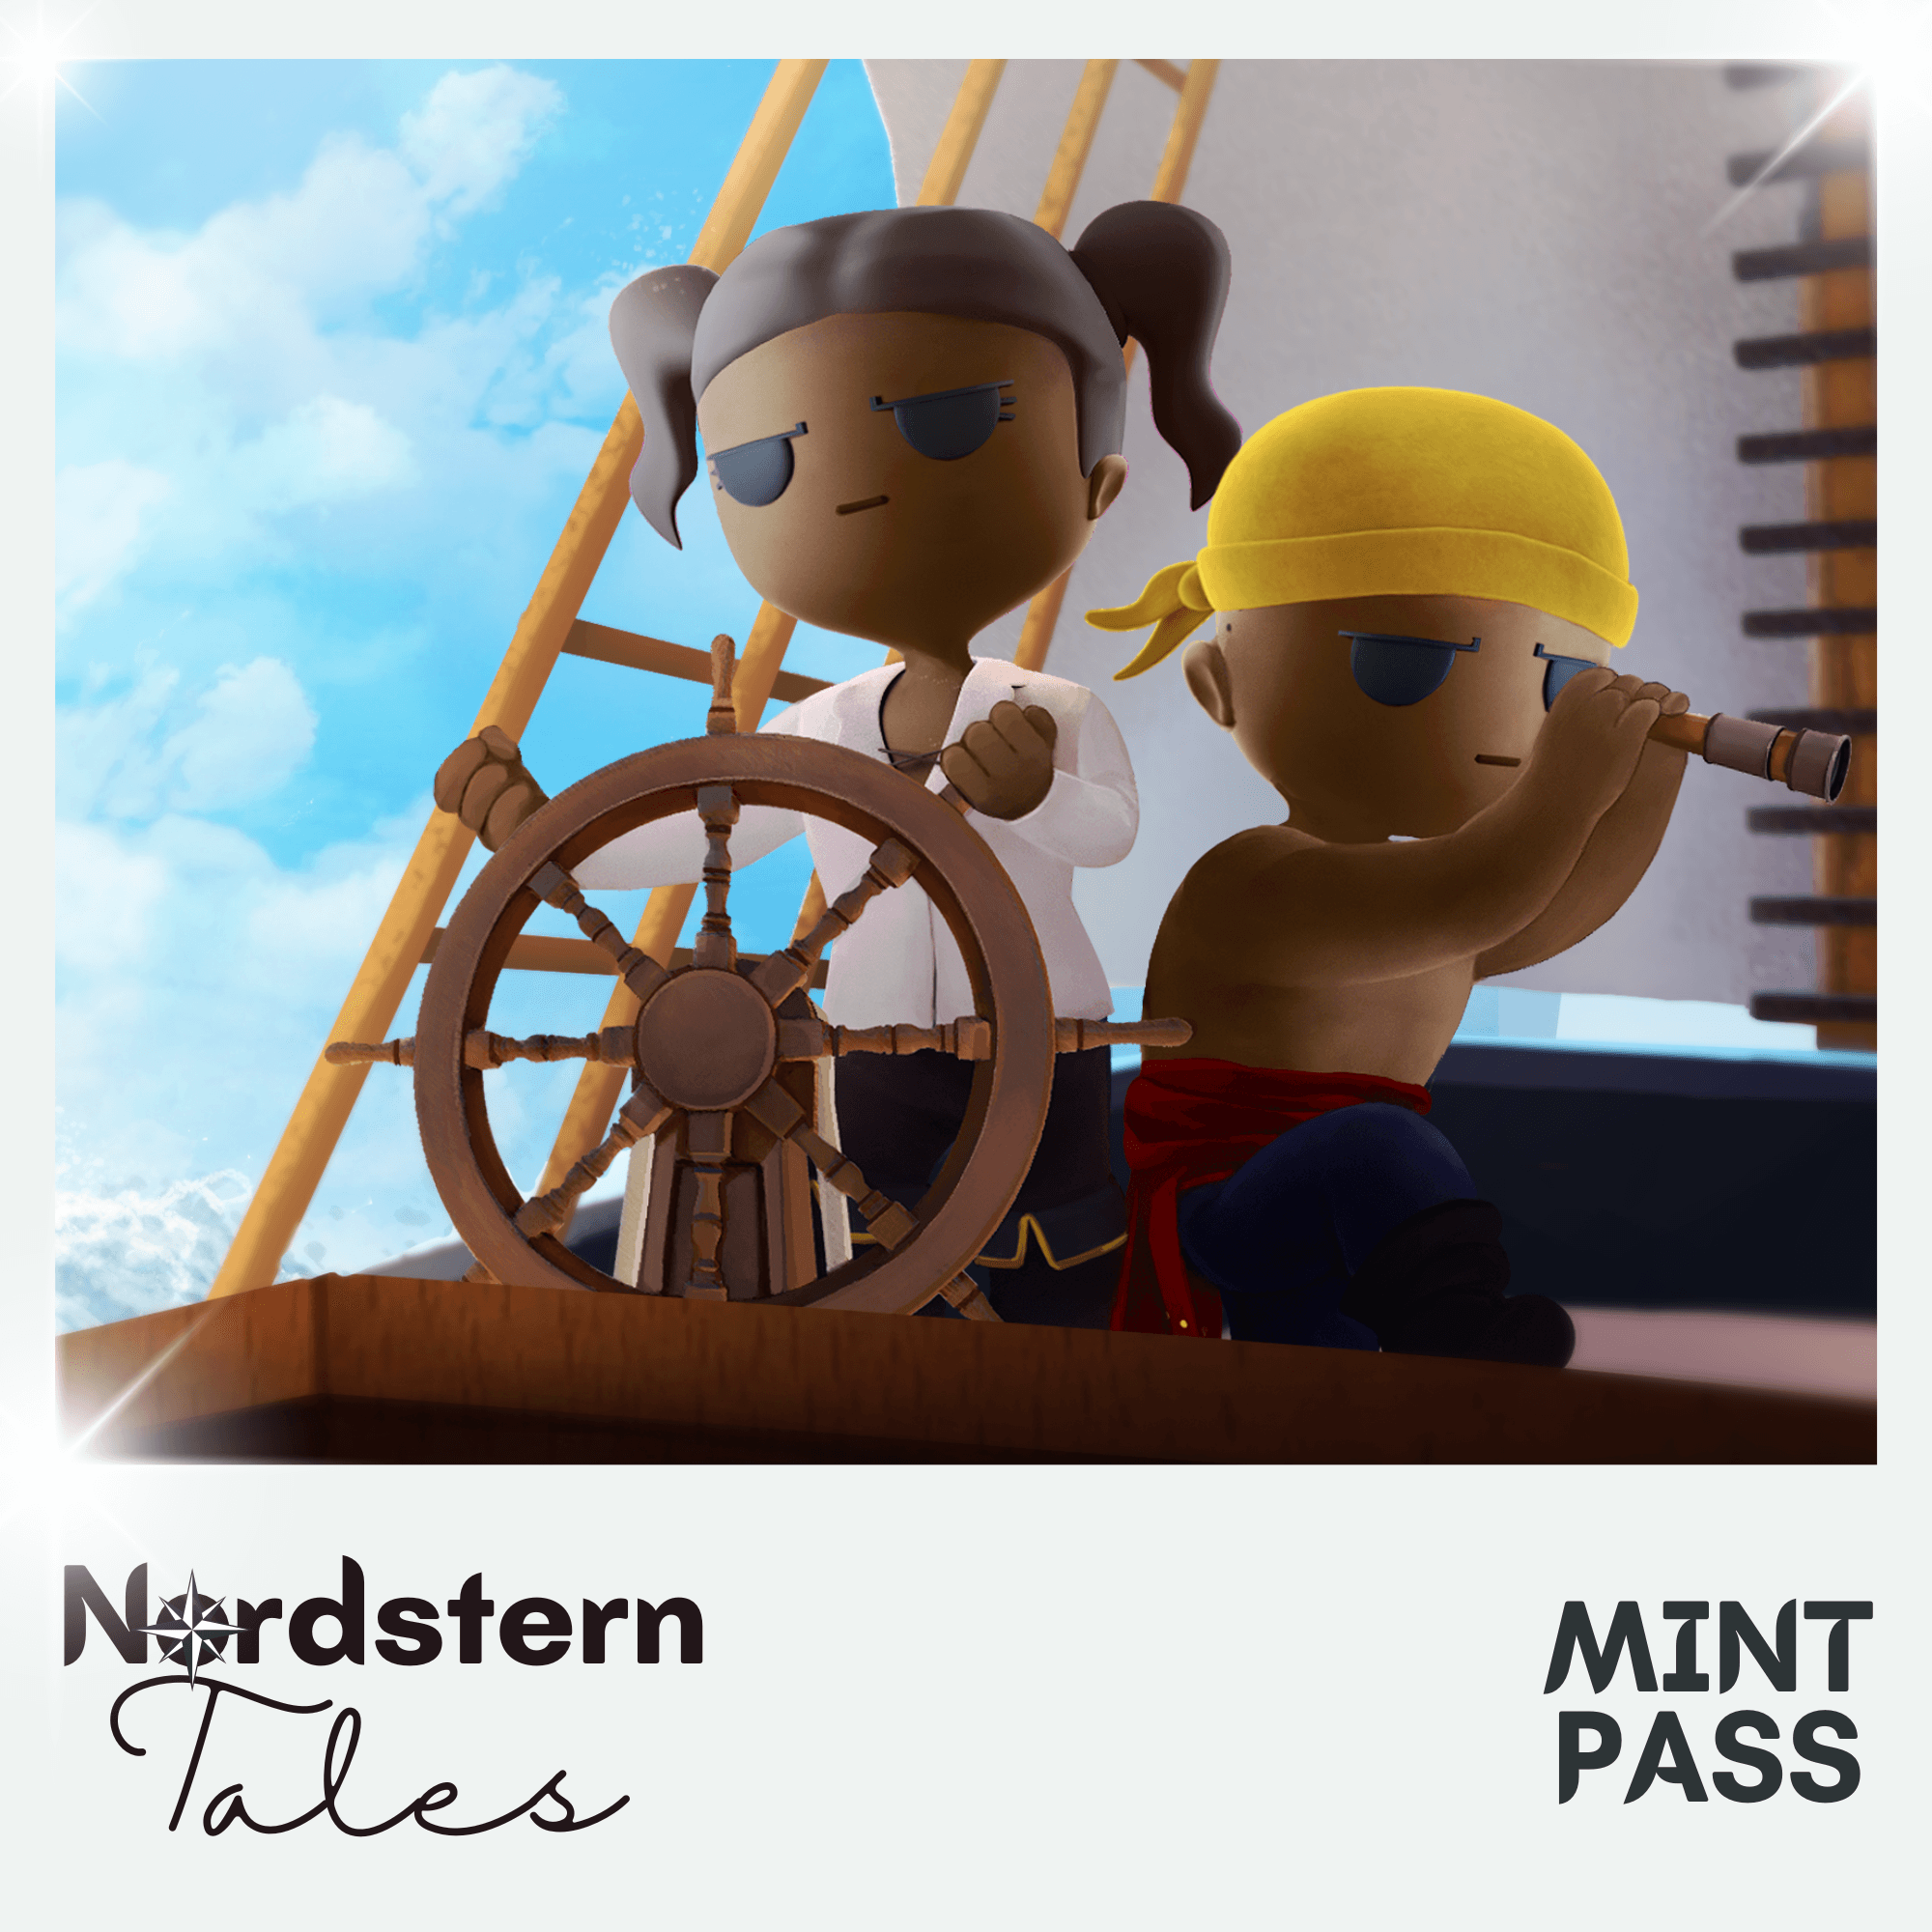 Nordstern Tales | Mint Pass